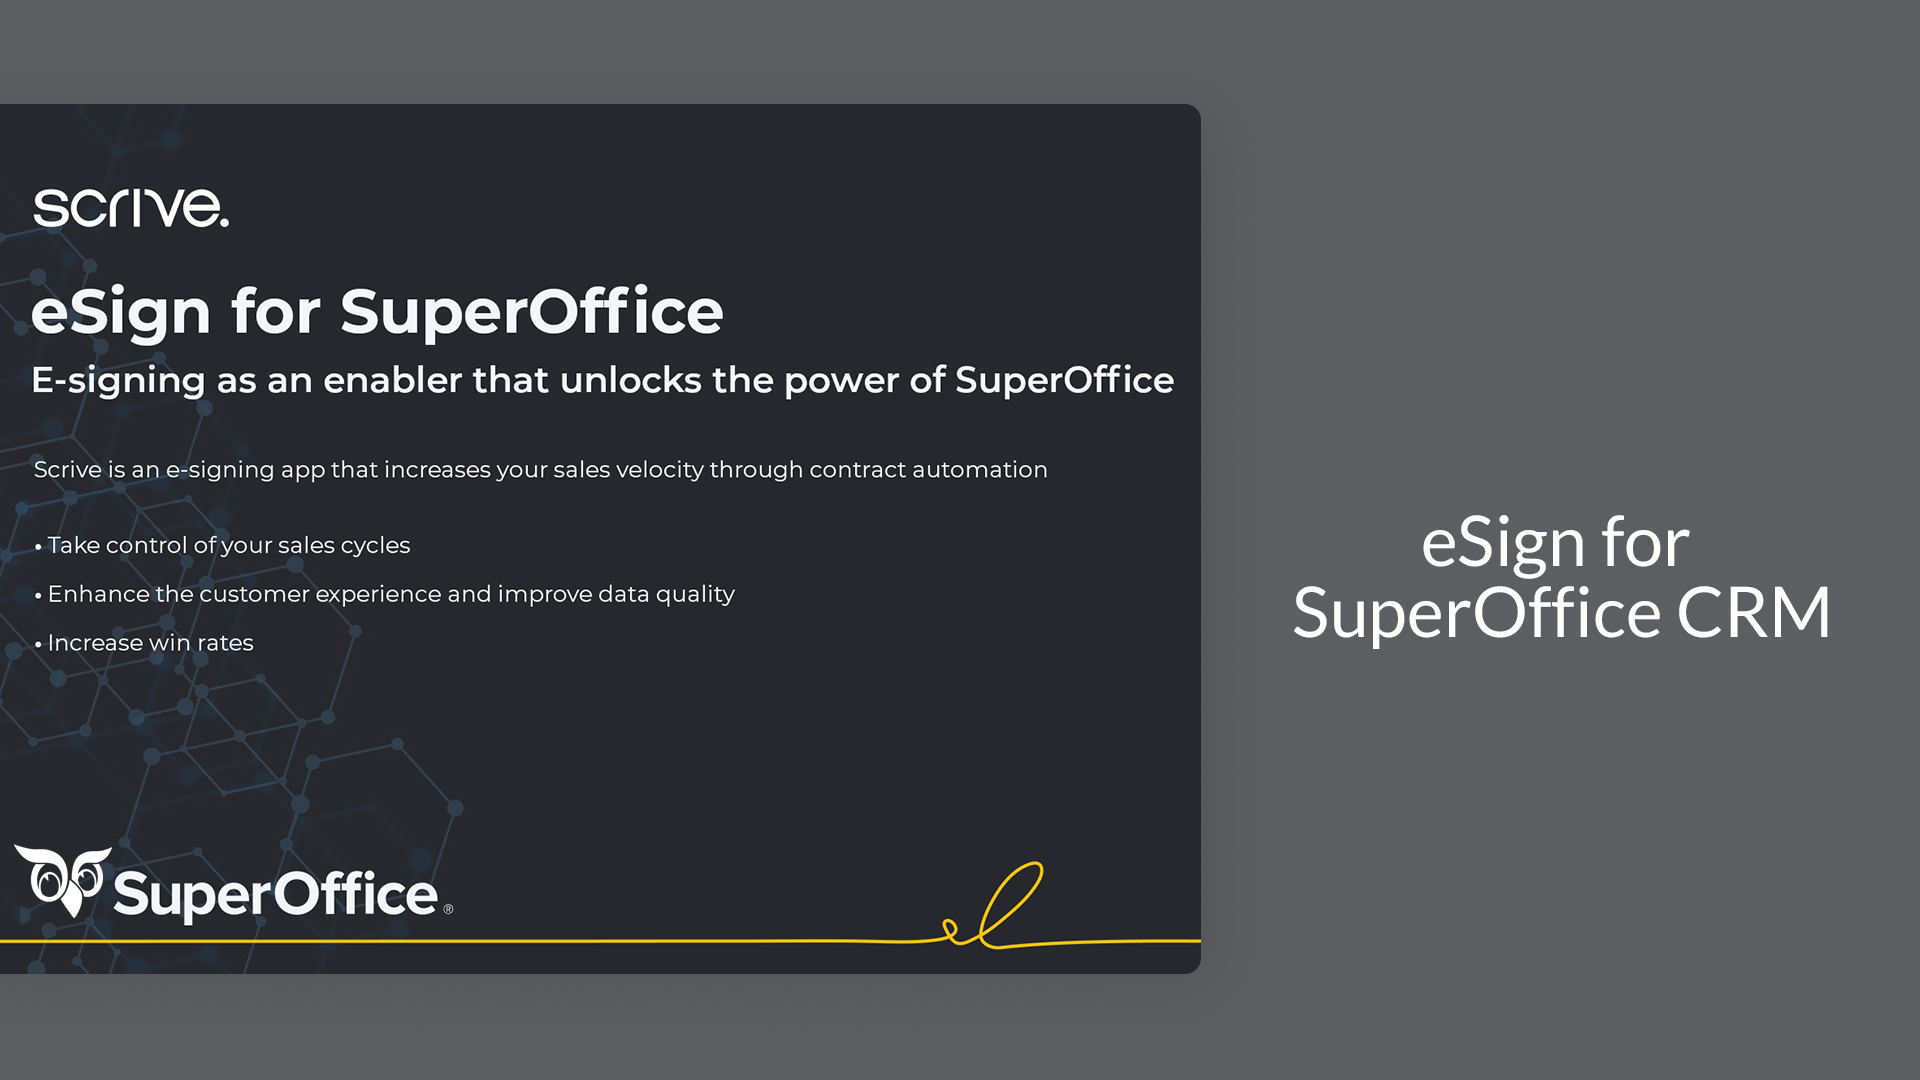 eSign for SuperOffice